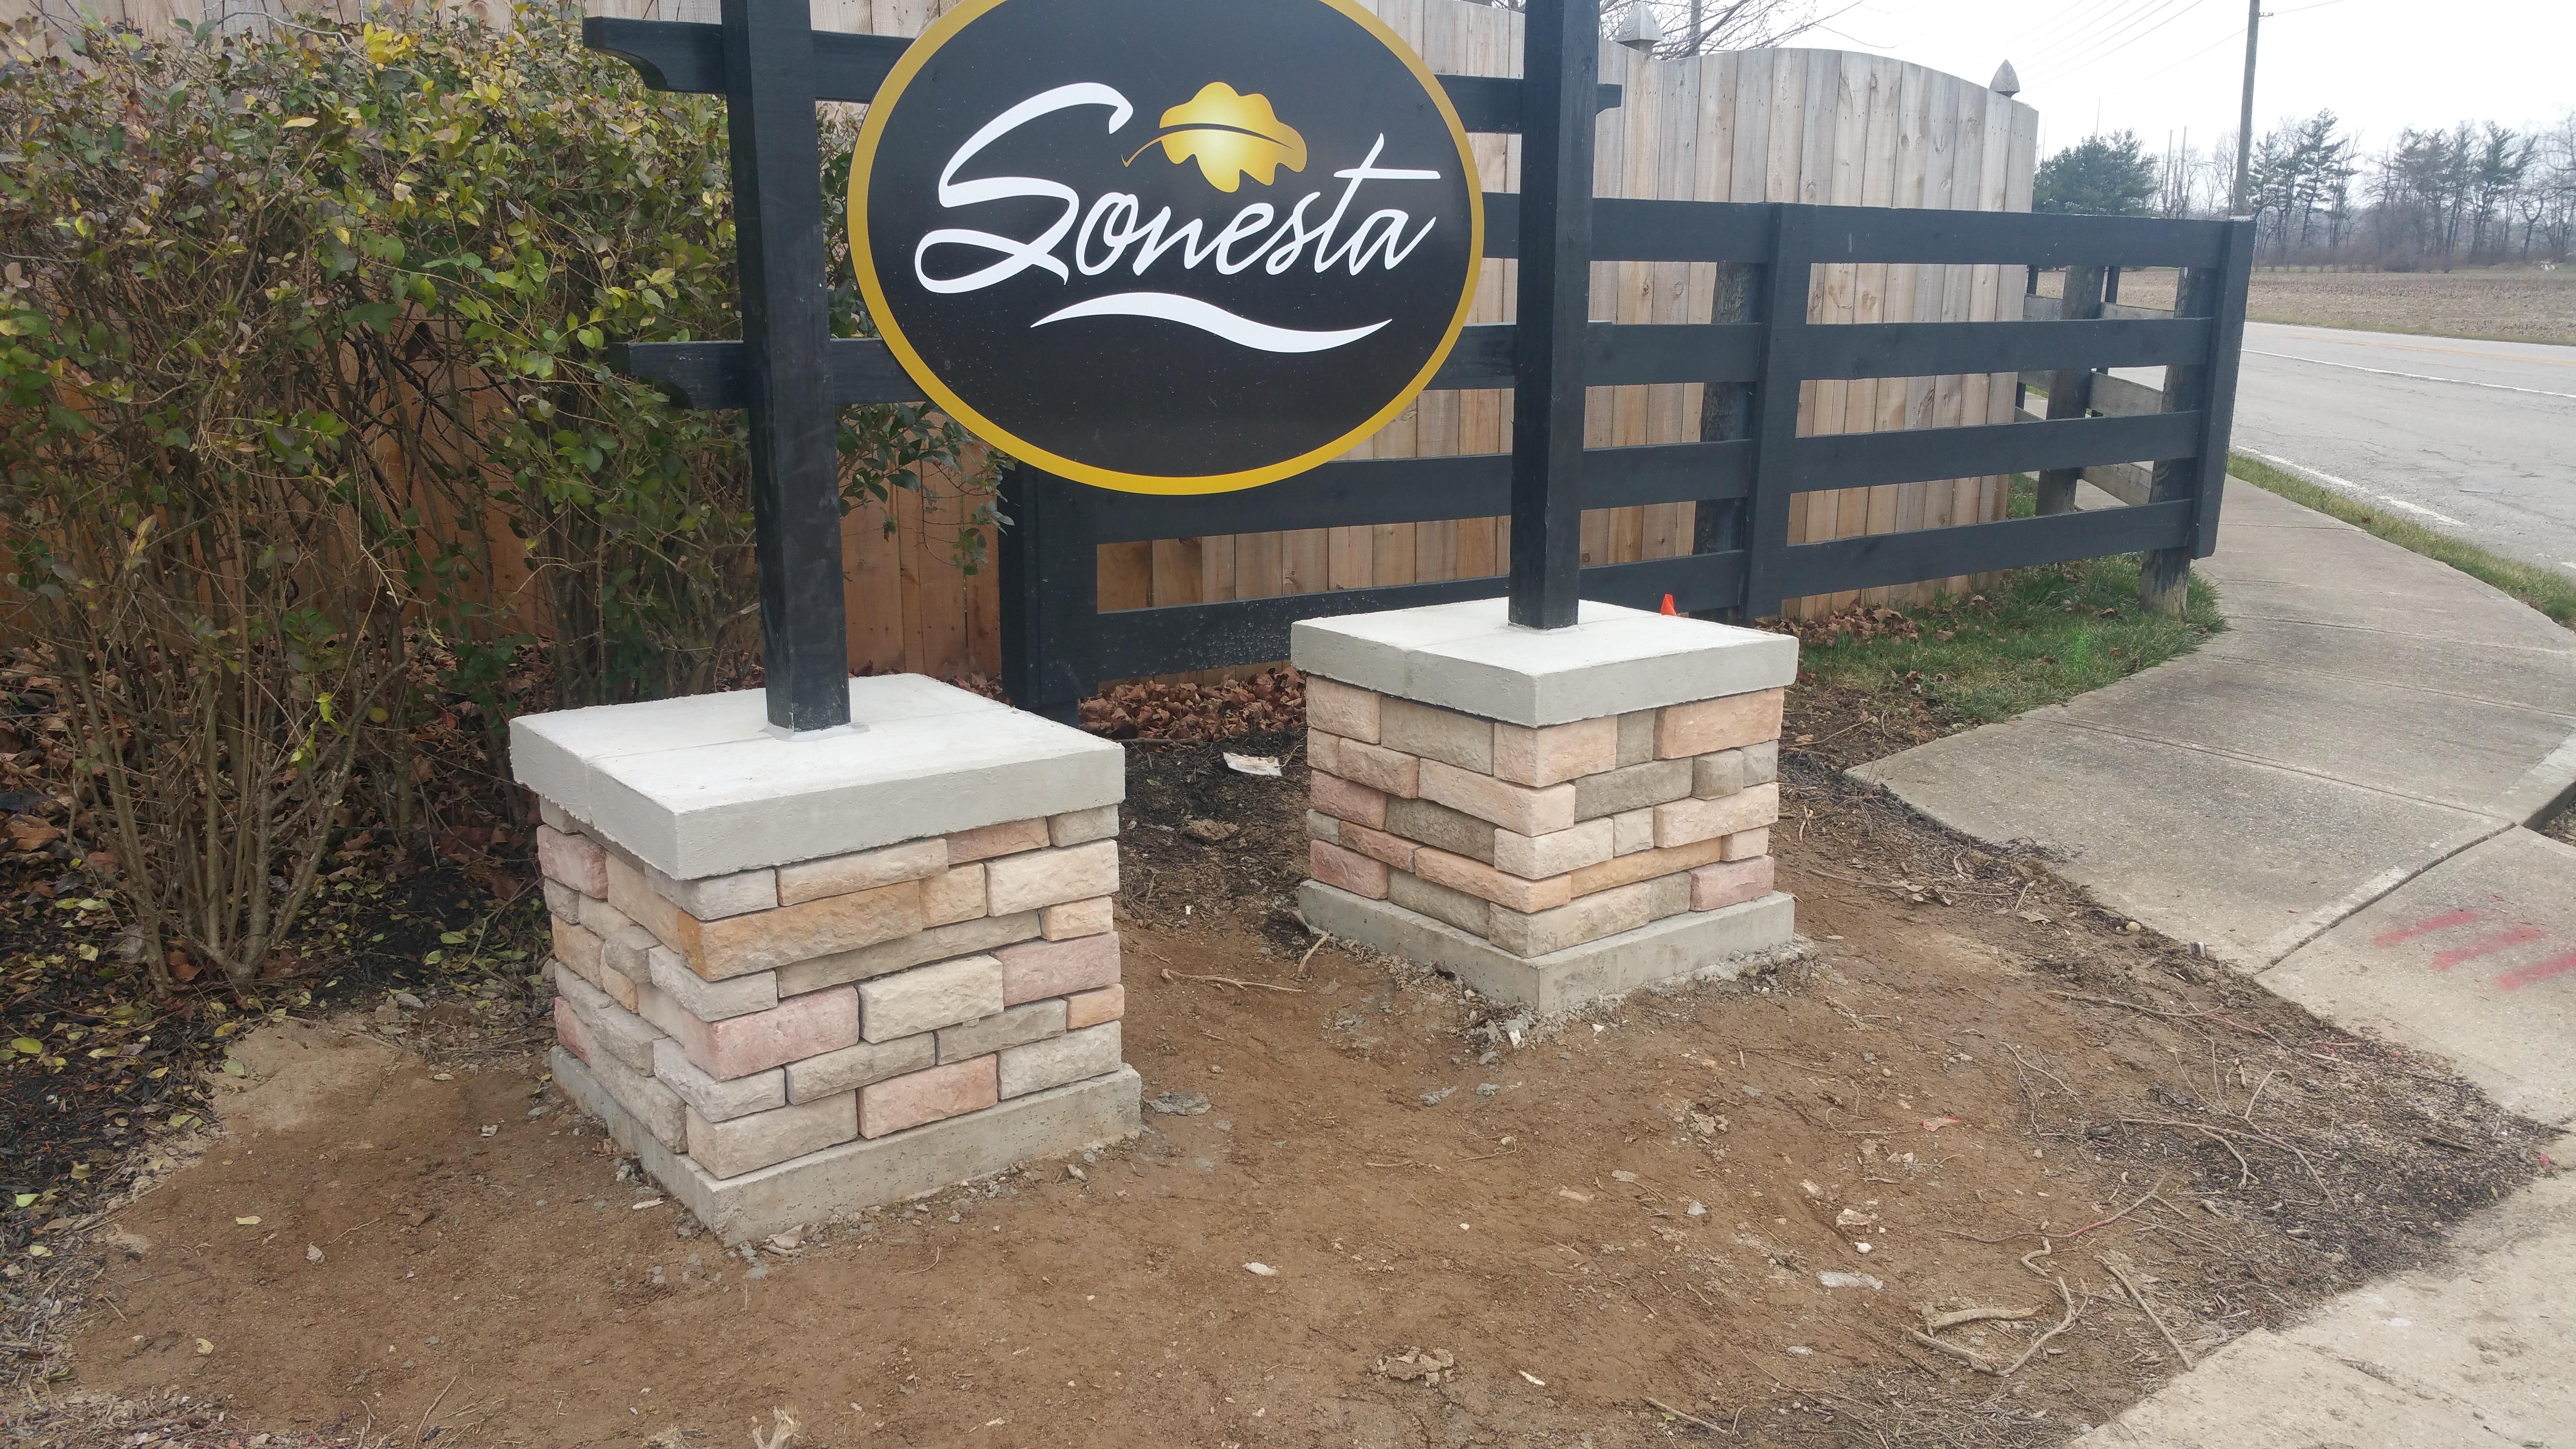 We installed the foundations, stone piers and wooden posts for our portion of this sign.